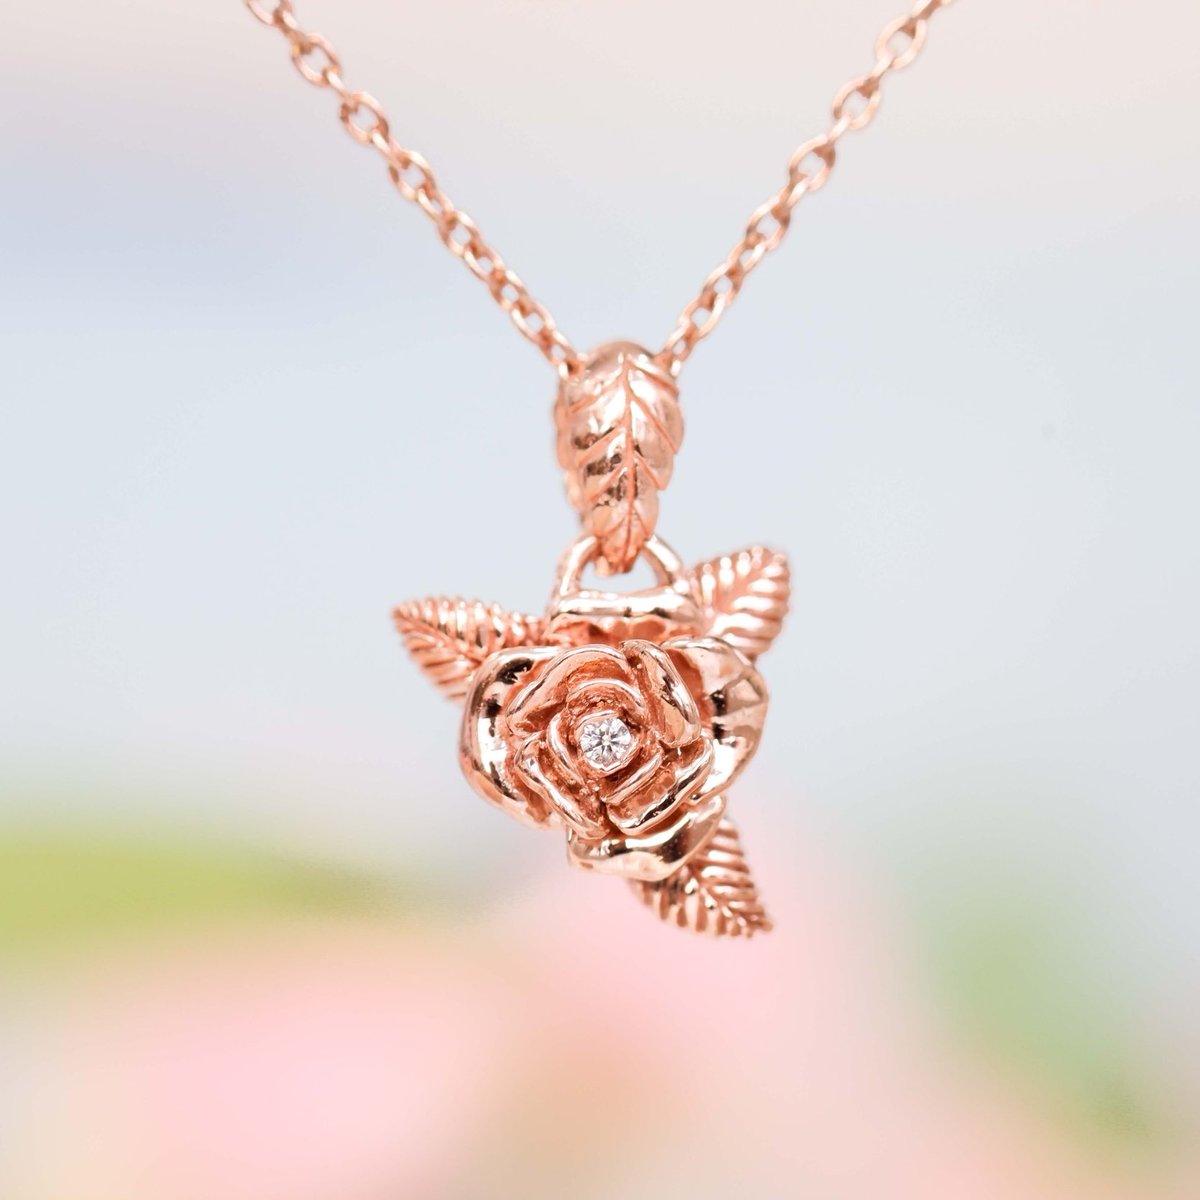 Rose flower in Rose Gold with Diamond✨

#roseflowerpendant #rosependant #flowerpendant #floralgardenjewel

#uniquependant #flowernecklace #rosenecklace #uniquenecklace #giftforher #promisejewellery #anniversary #anniverarygifts #uniquegiftshop #uniquegift #floraldesign